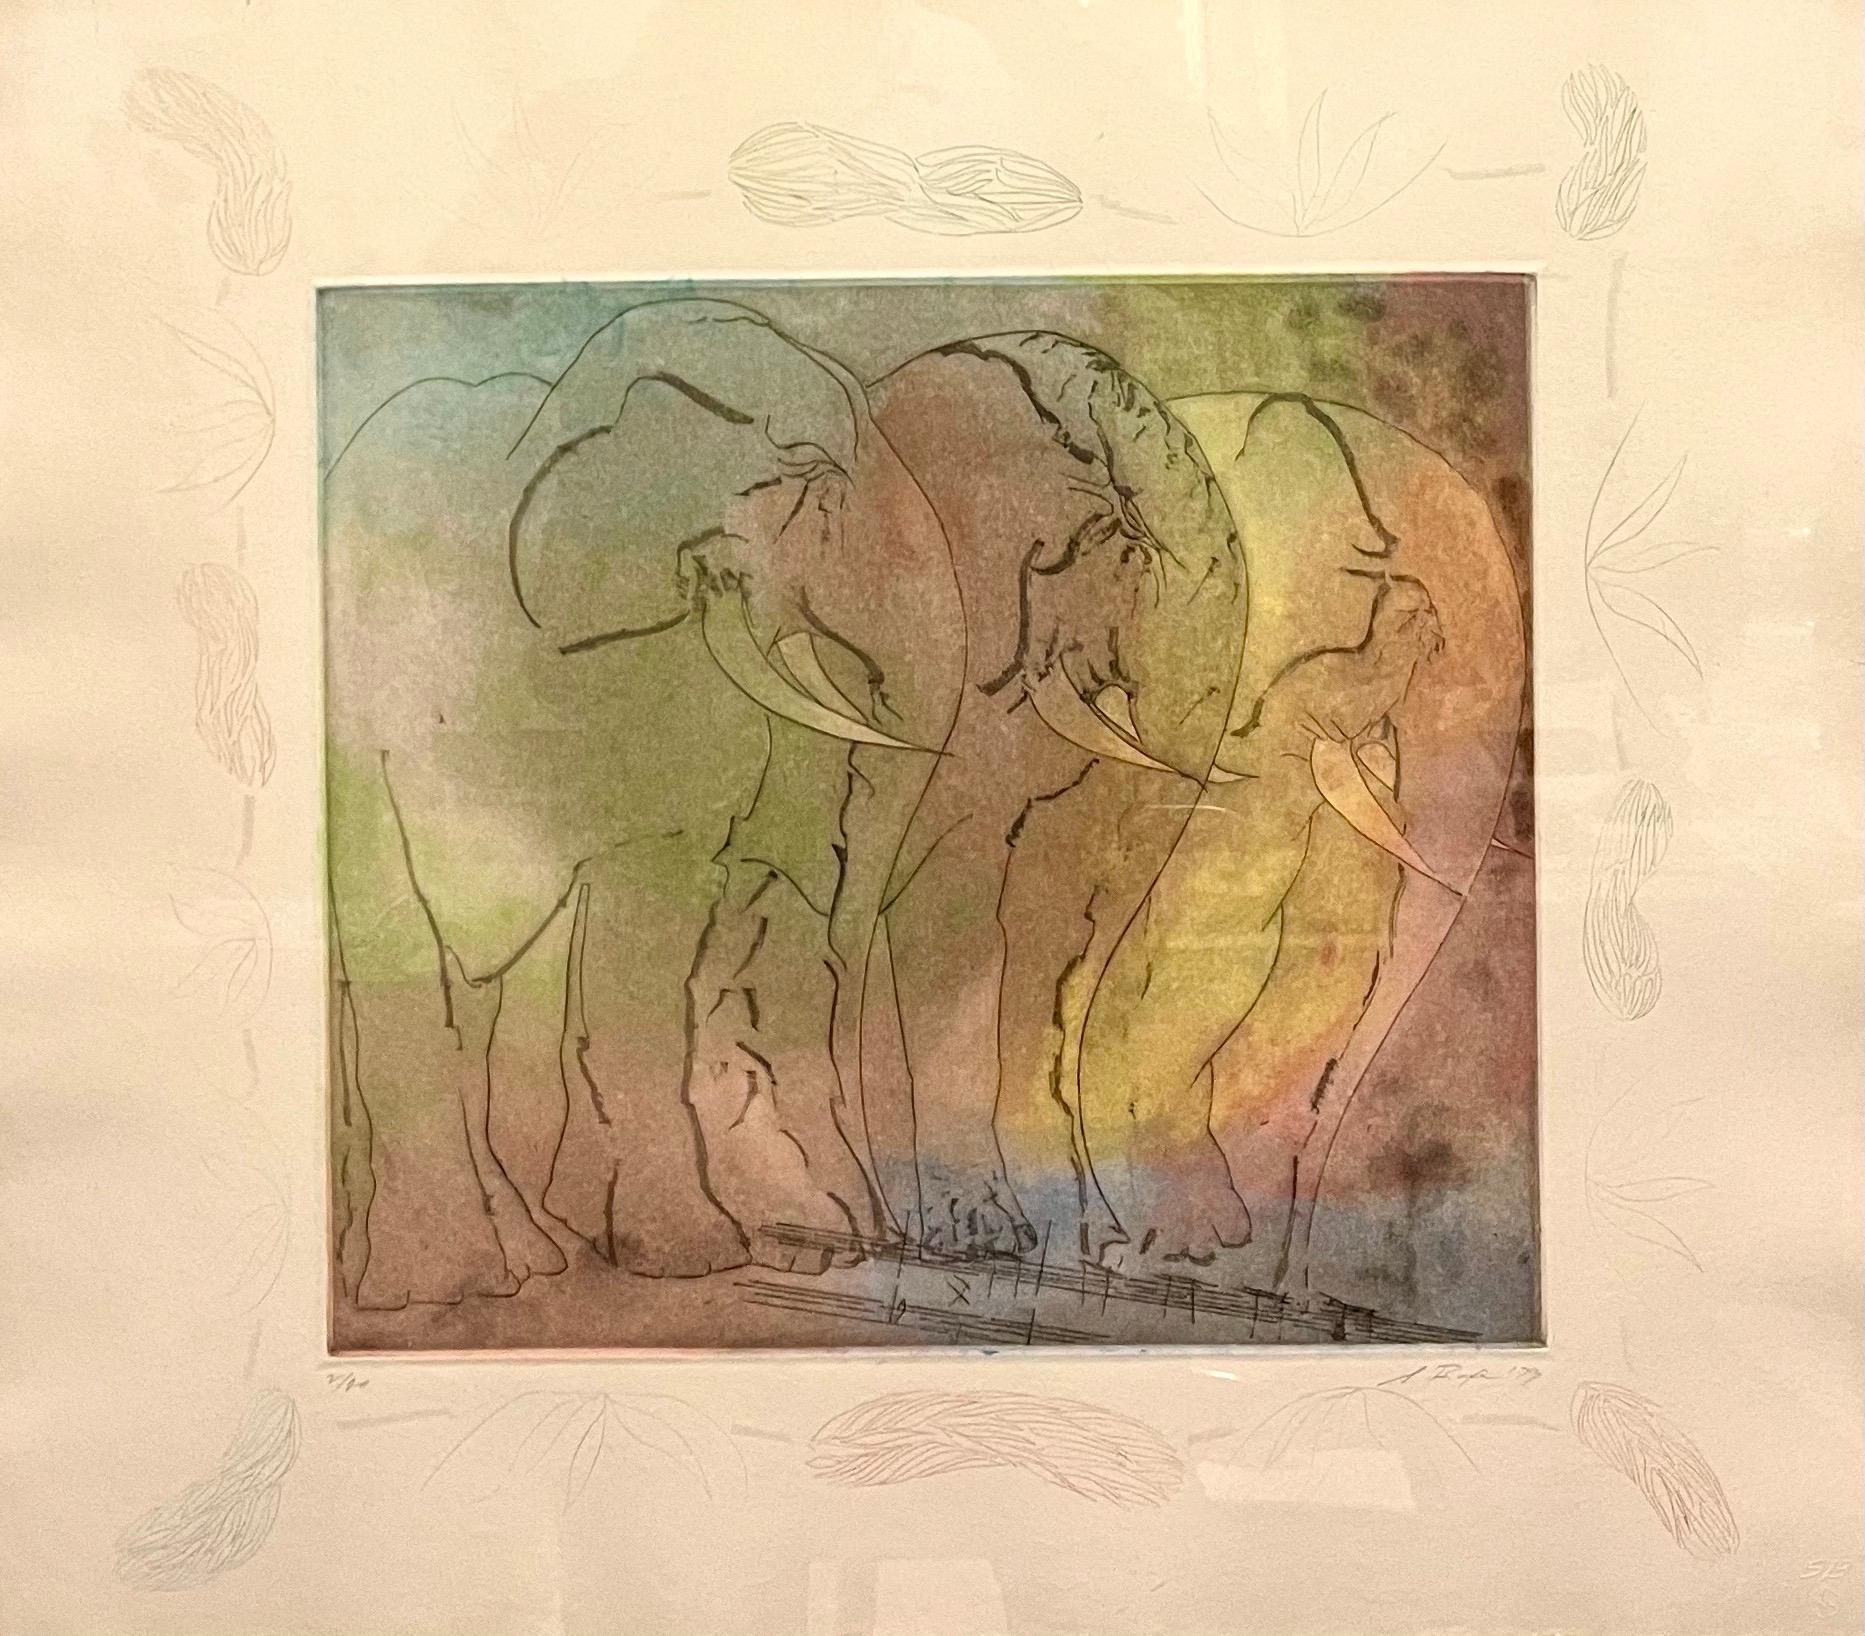 Stanley Boxer Aquatint Intaglio Etching Elephant Herd Abstract Expressionist 